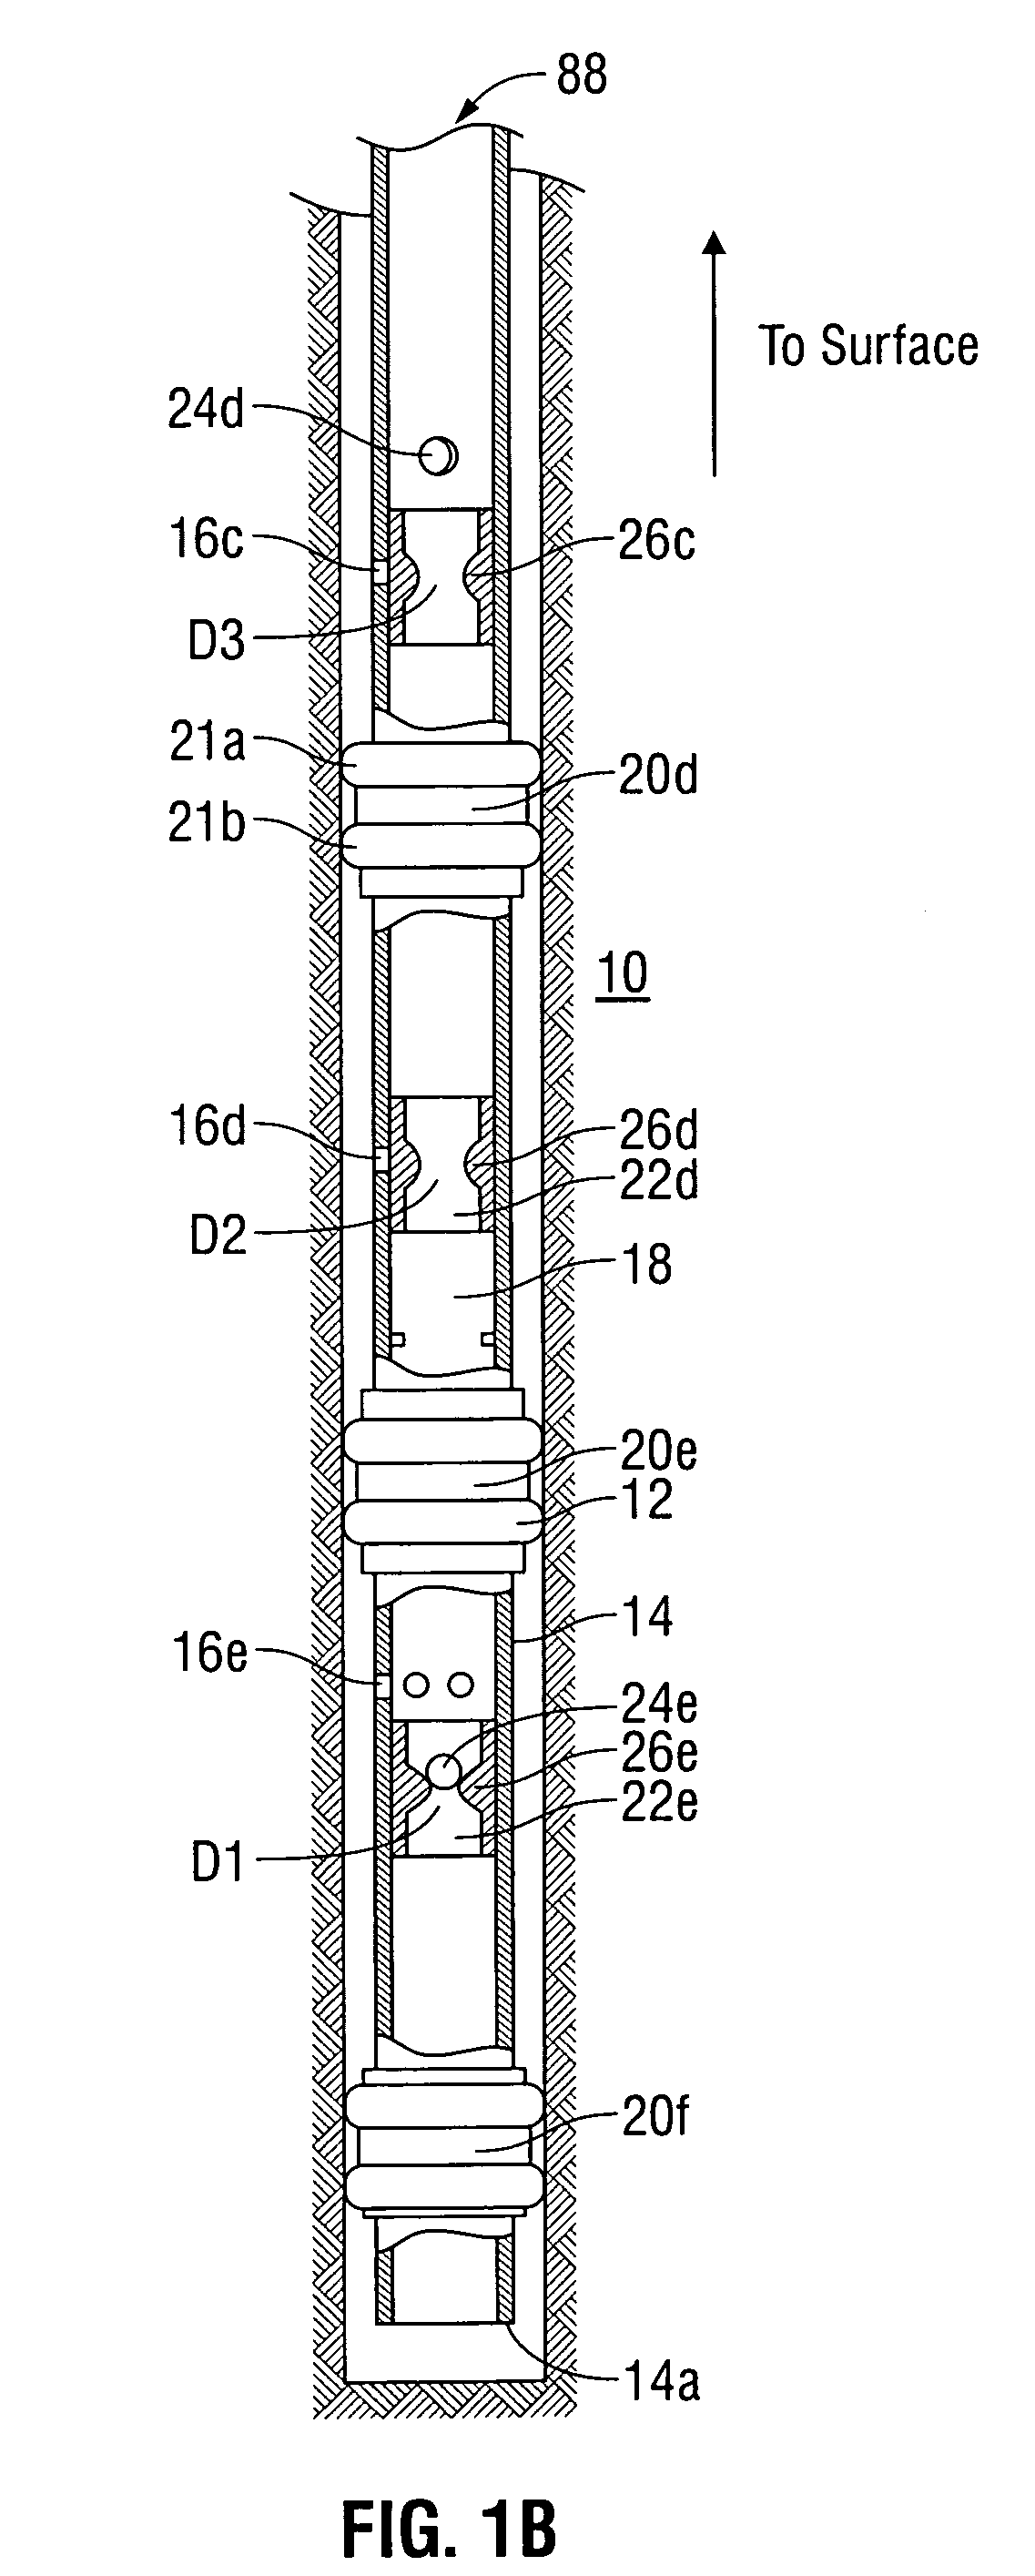 Ball catcher apparatus for use in fracturing of formations surrounding horizontal oil and gas wells, and method for using same